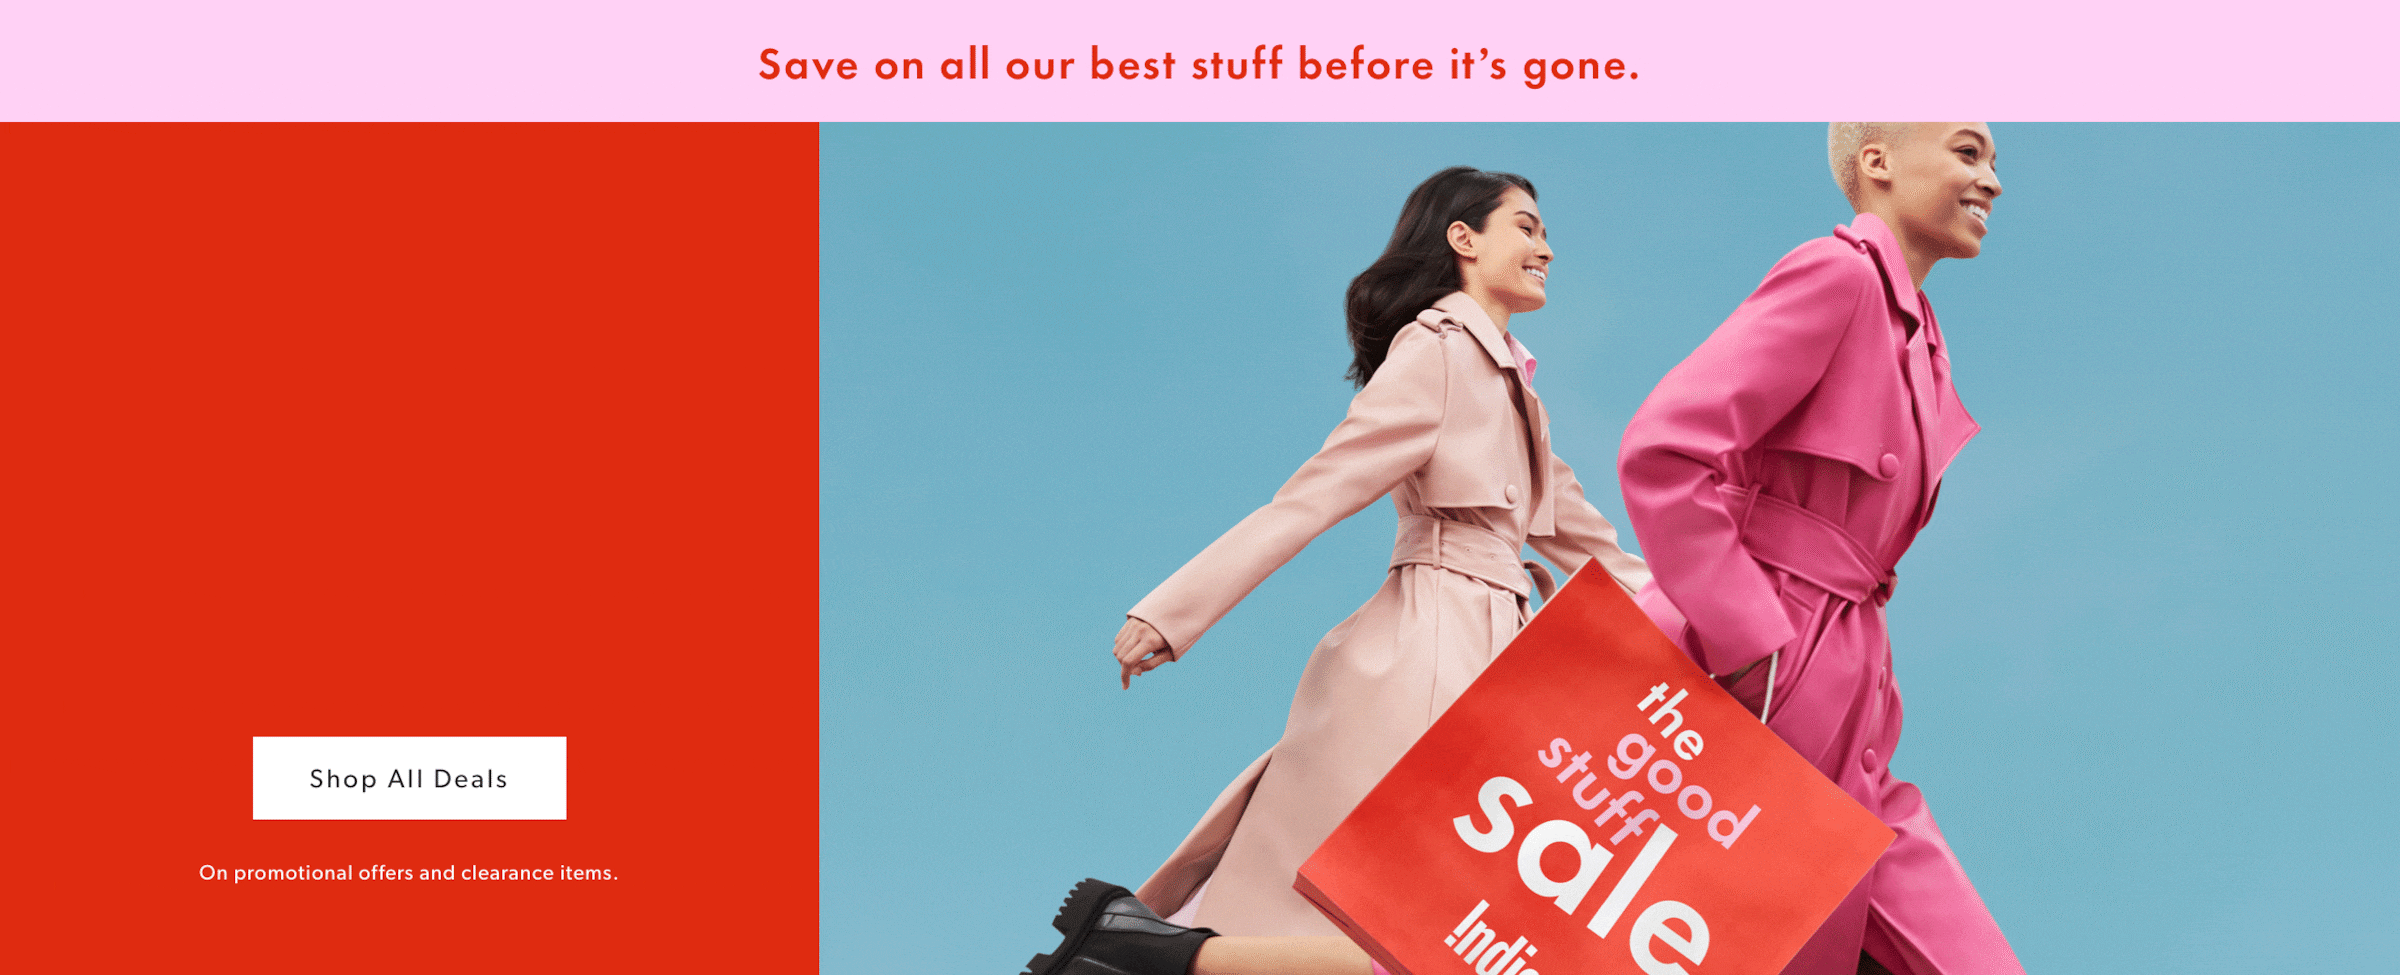 Up to 50% off The Good Stuff Sale. On promotional and clearance items.